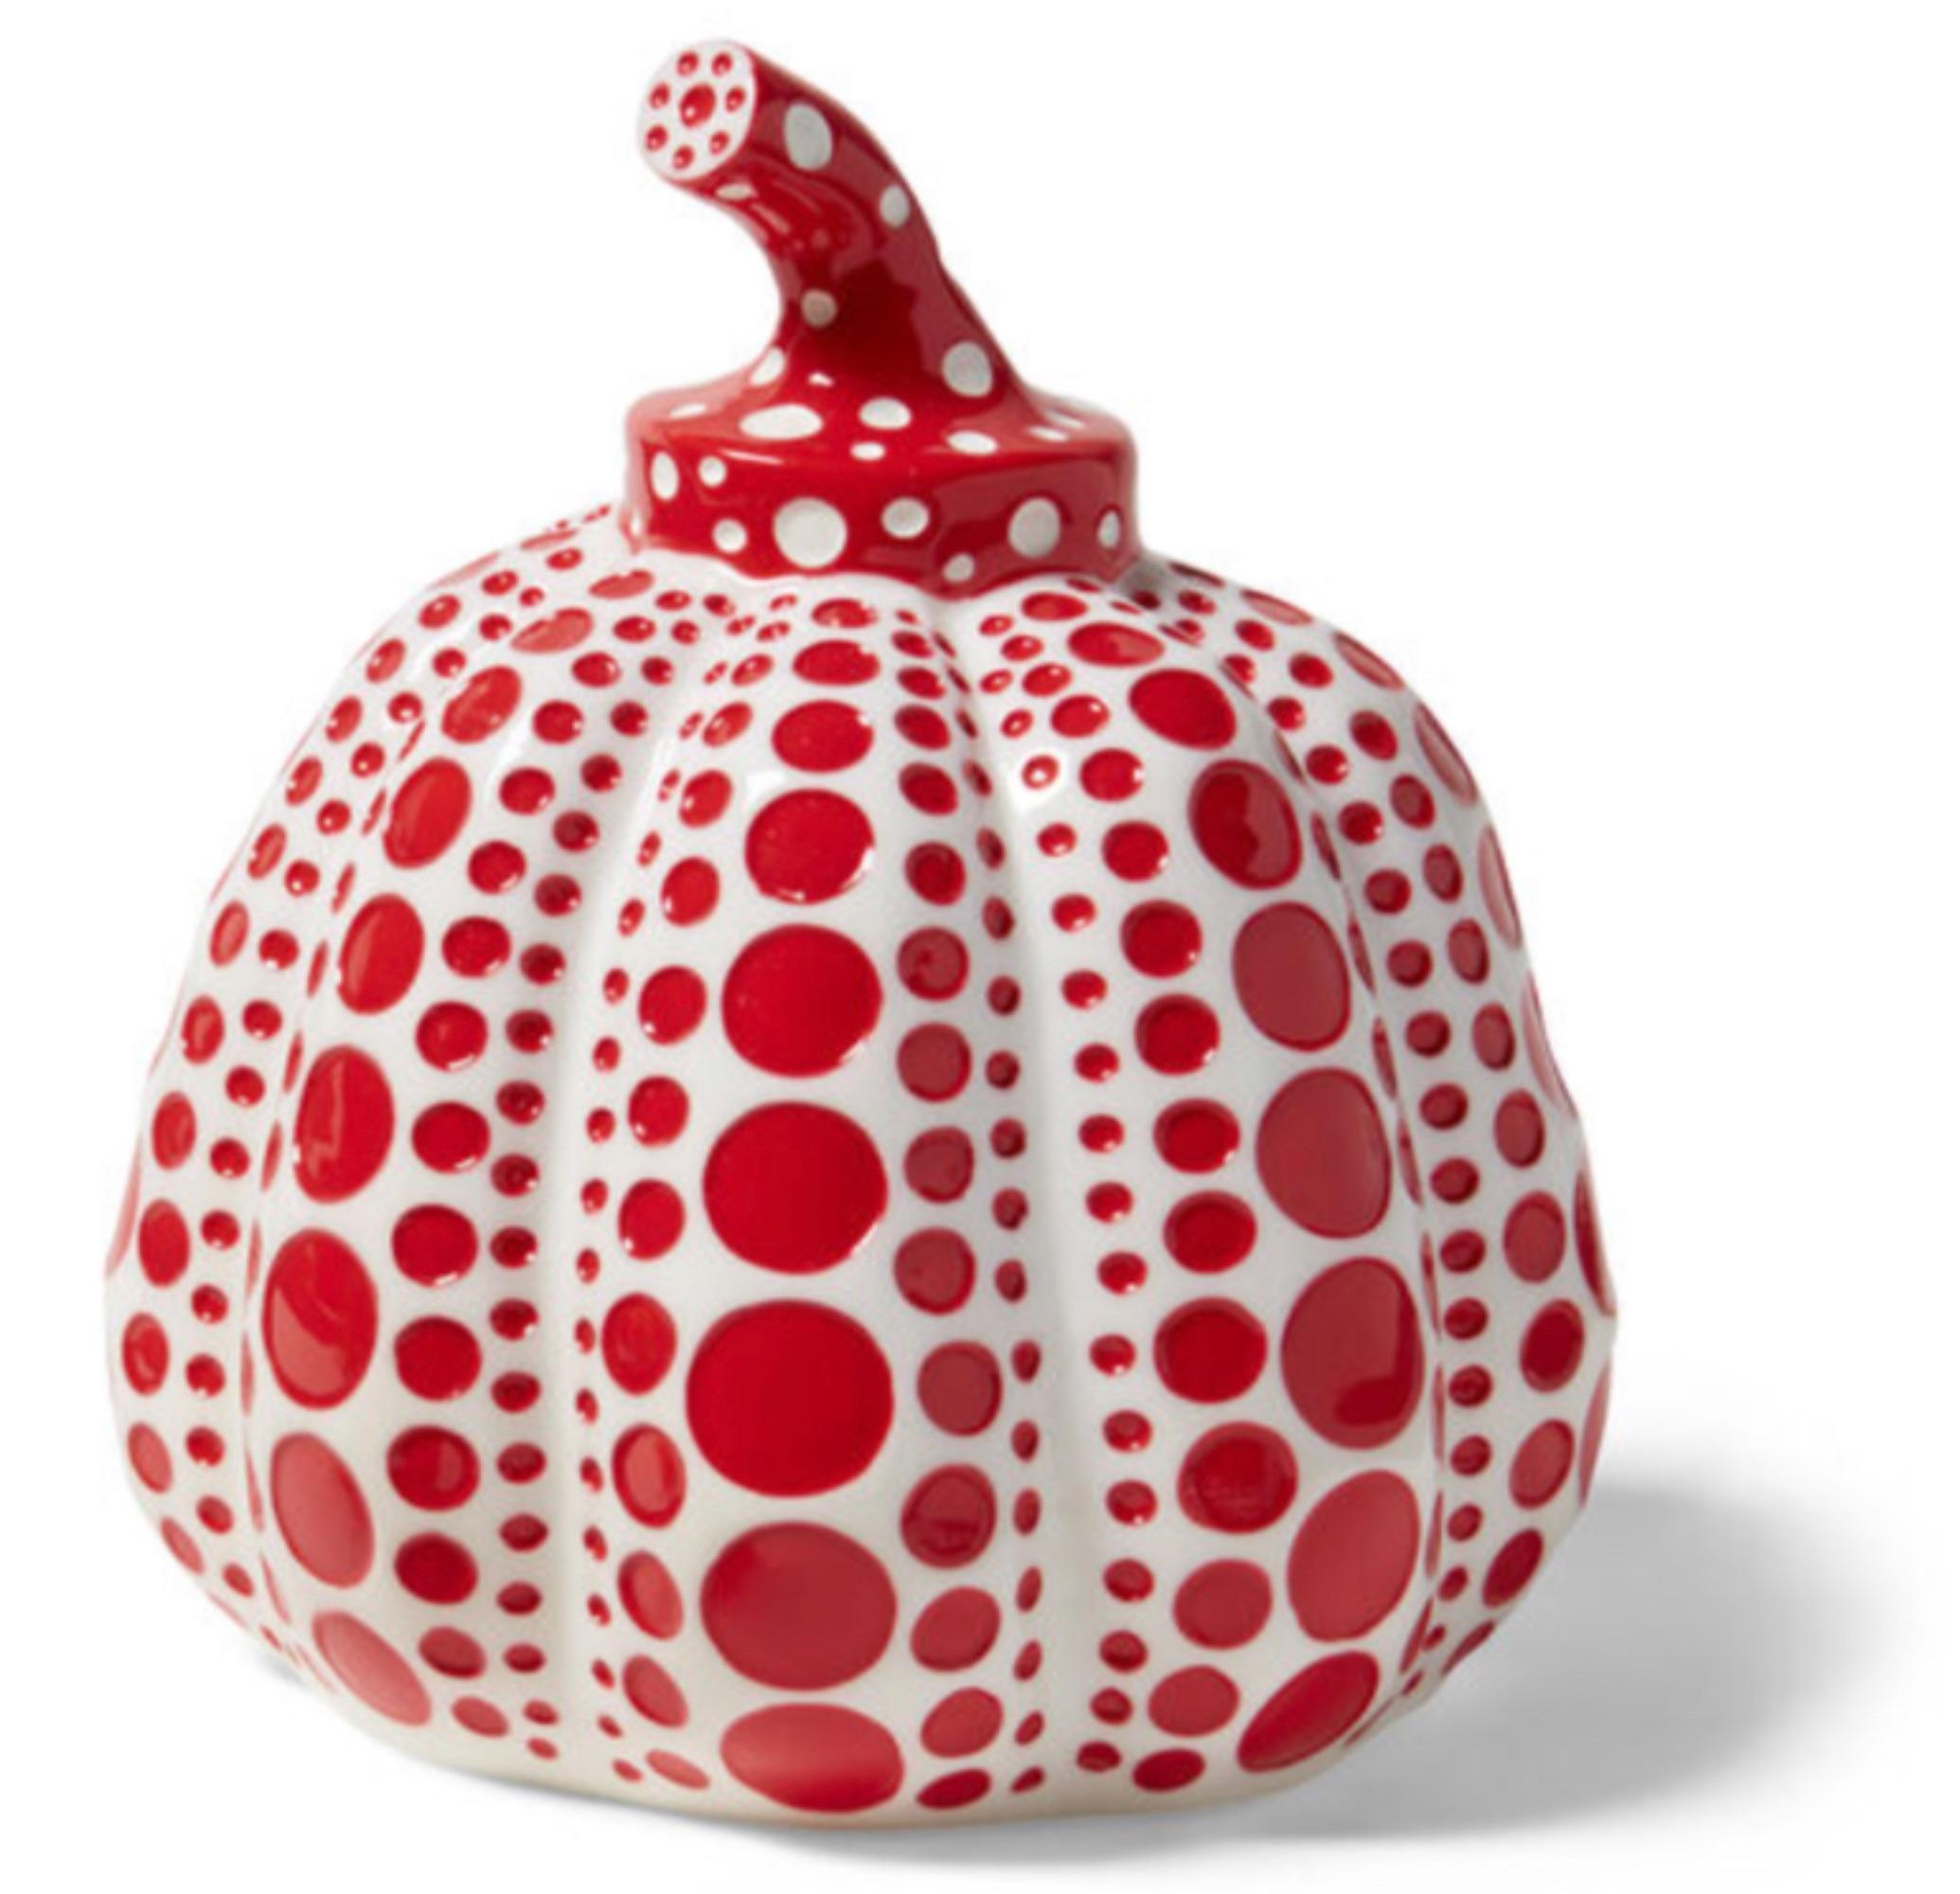 Red & Yellow Pumpkin (two sculptures) - Contemporary Sculpture by Yayoi Kusama